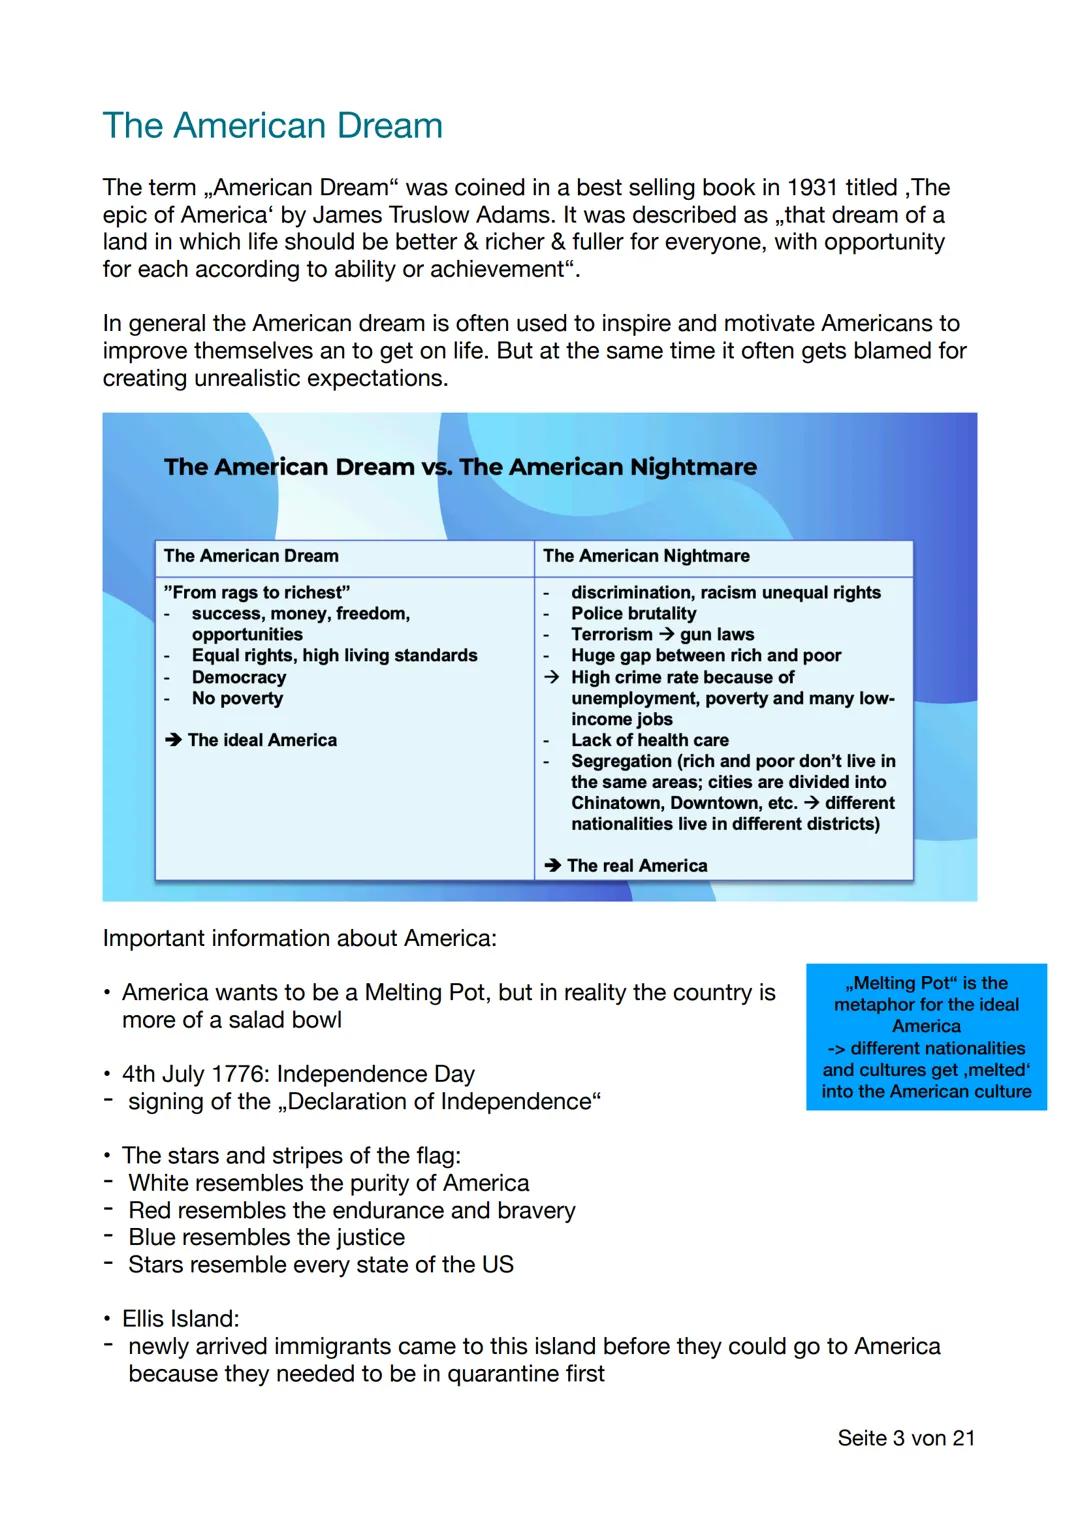 Englisch Lernblätter
Table of Contents
1. American Dream
- important information about America
- The American political system
2. Globalisat